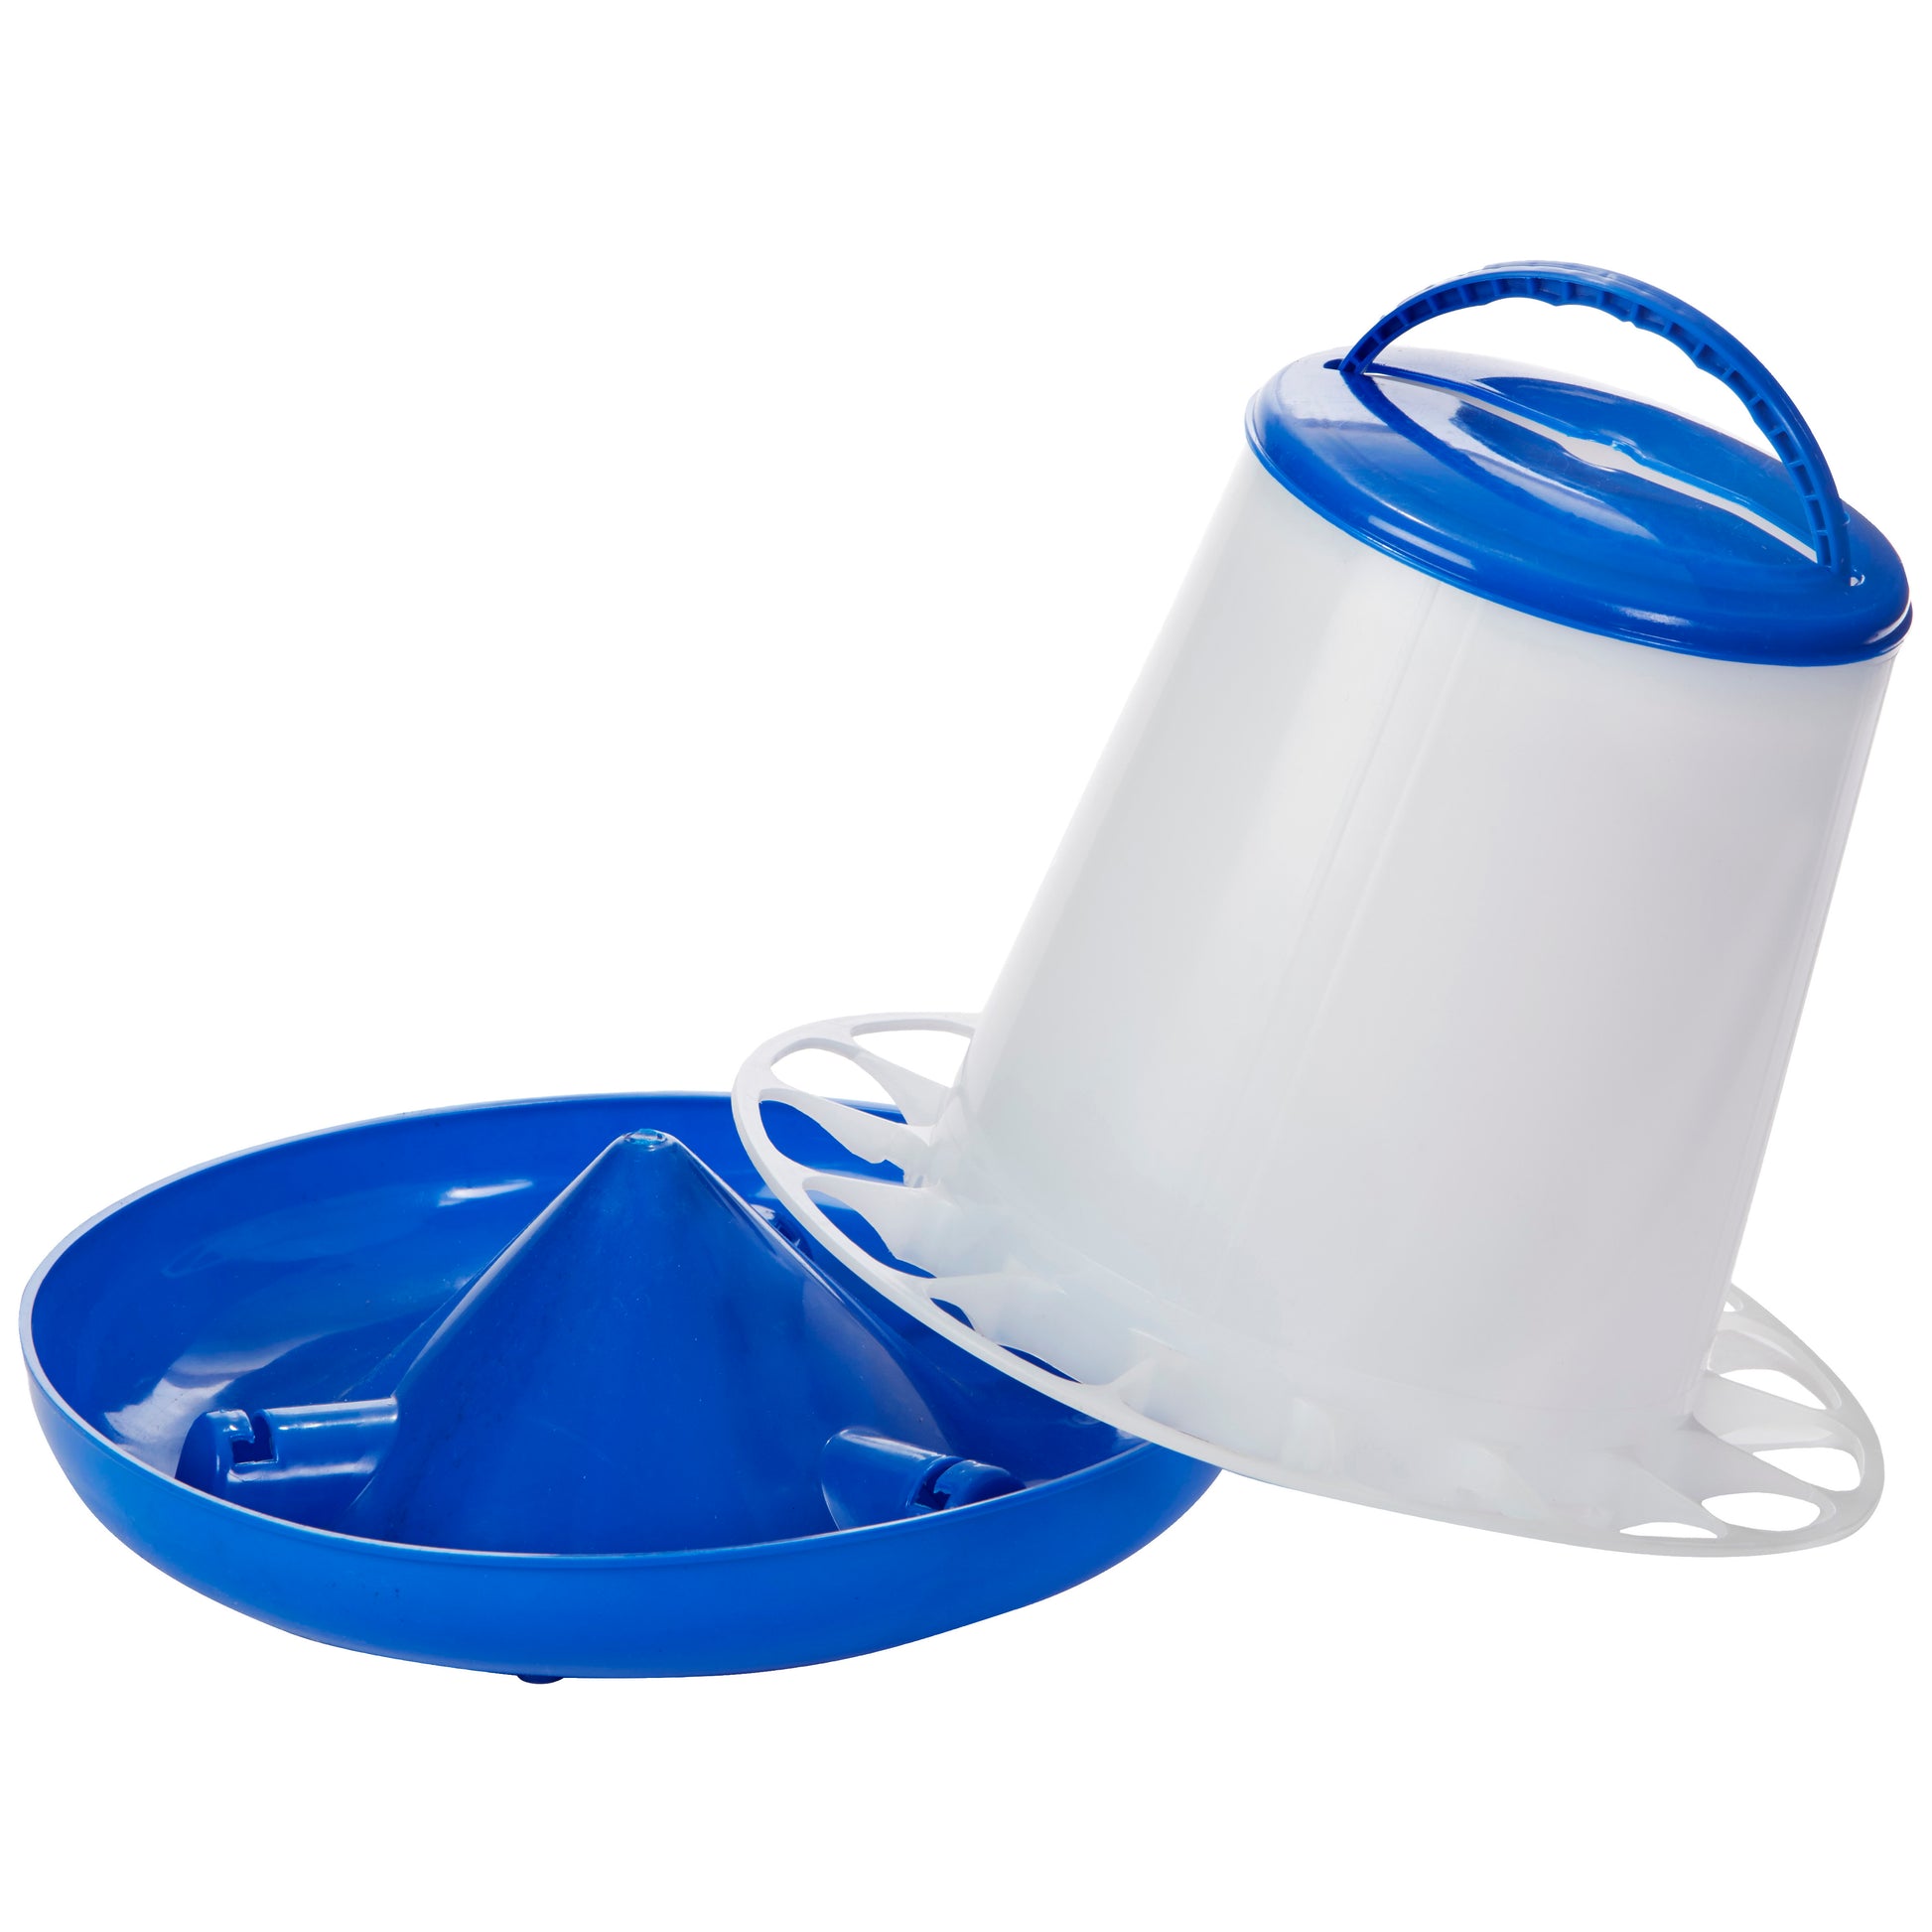 Double-Tuf™ 5LB Plastic Poultry Feeder - Critter Country Supply Ltd.